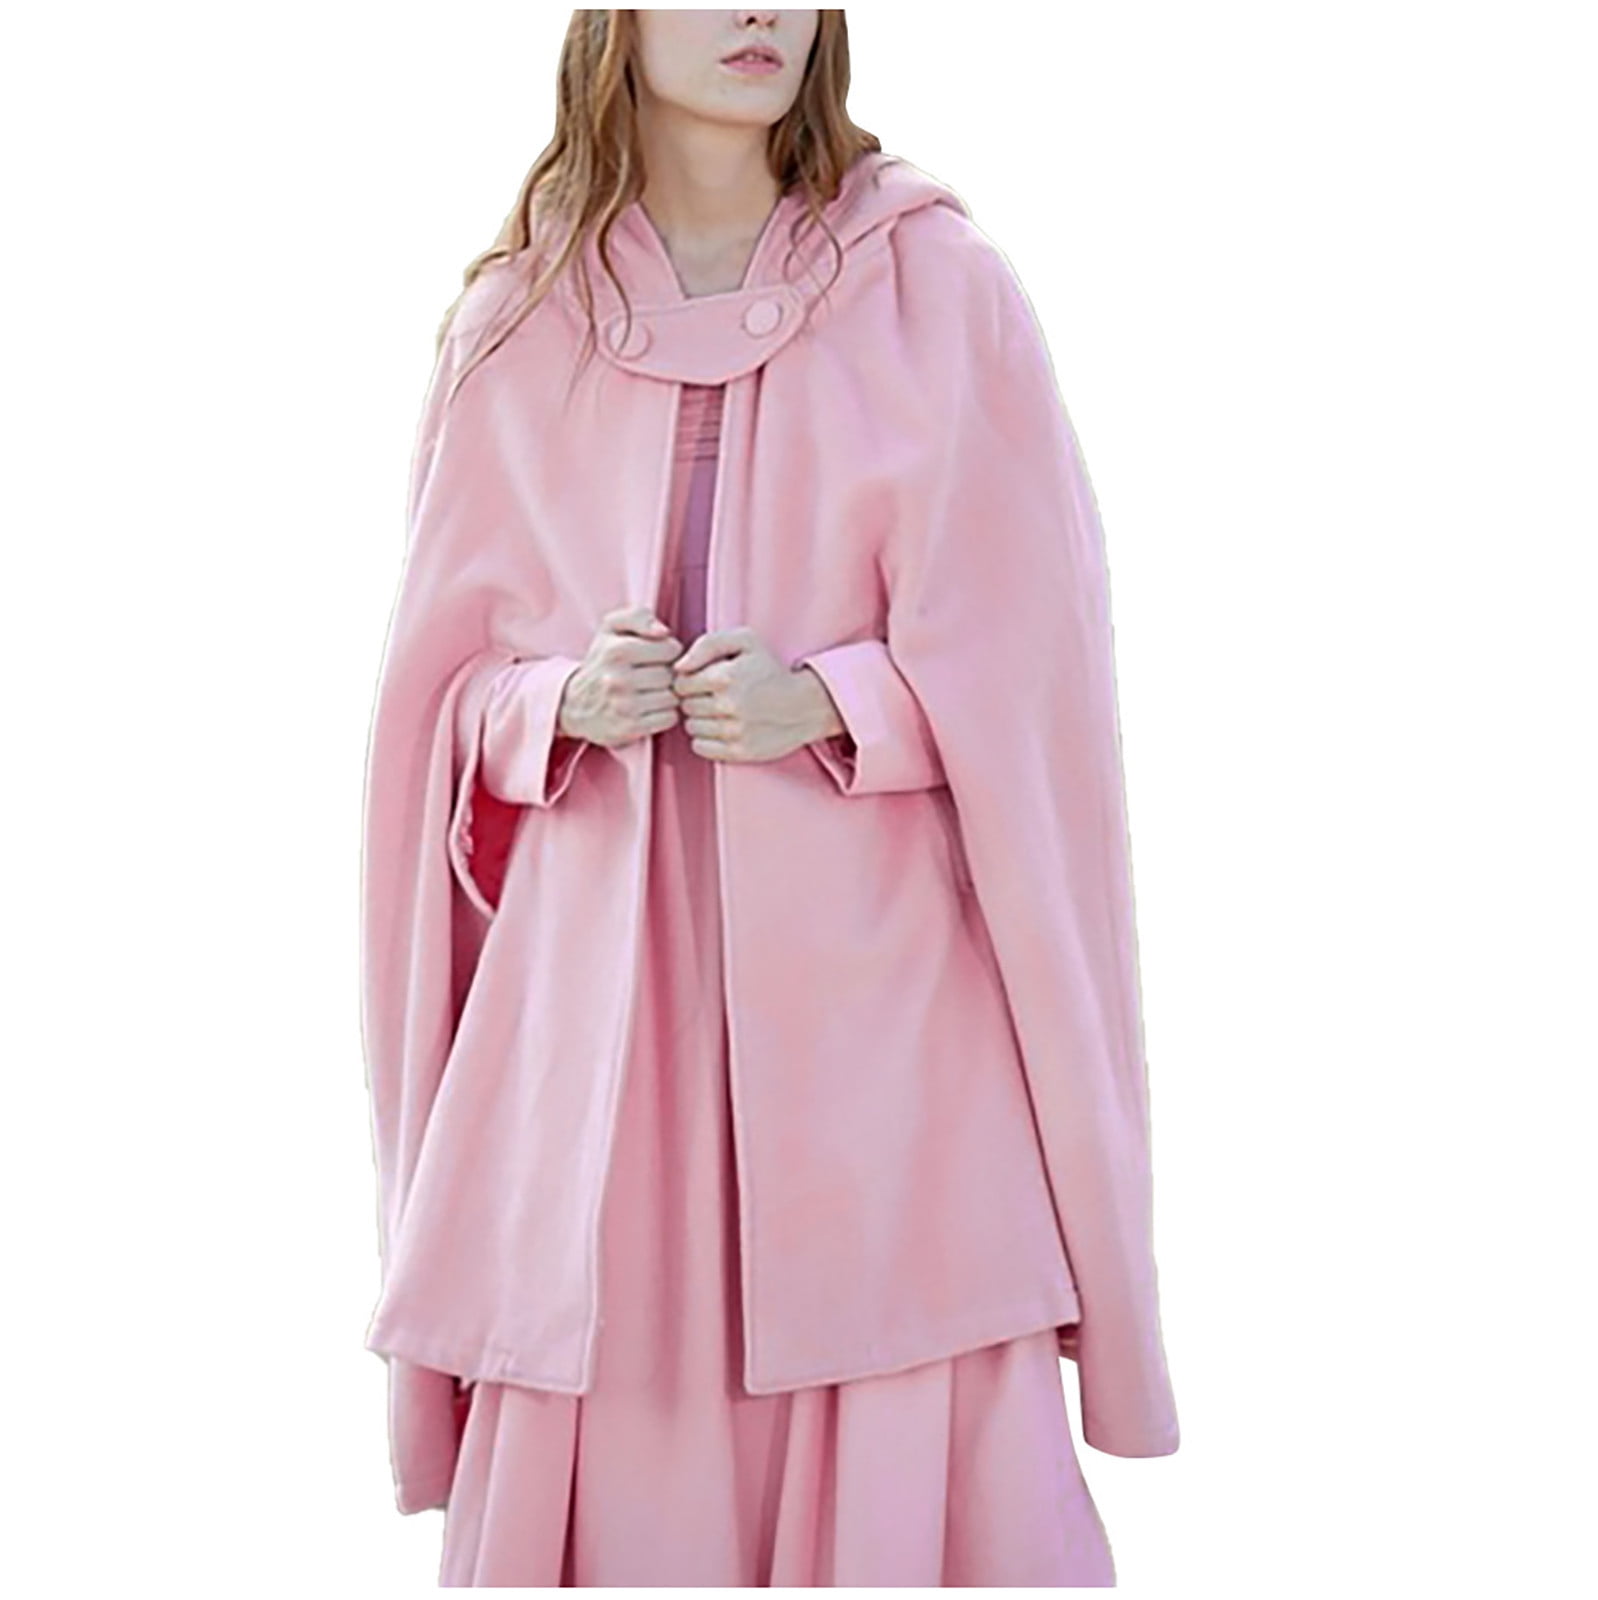  Women Hooded Wool Blend Maxi Long Cape Poncho Maxi Cloak Coat  Fall Winter Trench Coat Robe Gothic Plus Size Clothes : Clothing, Shoes 